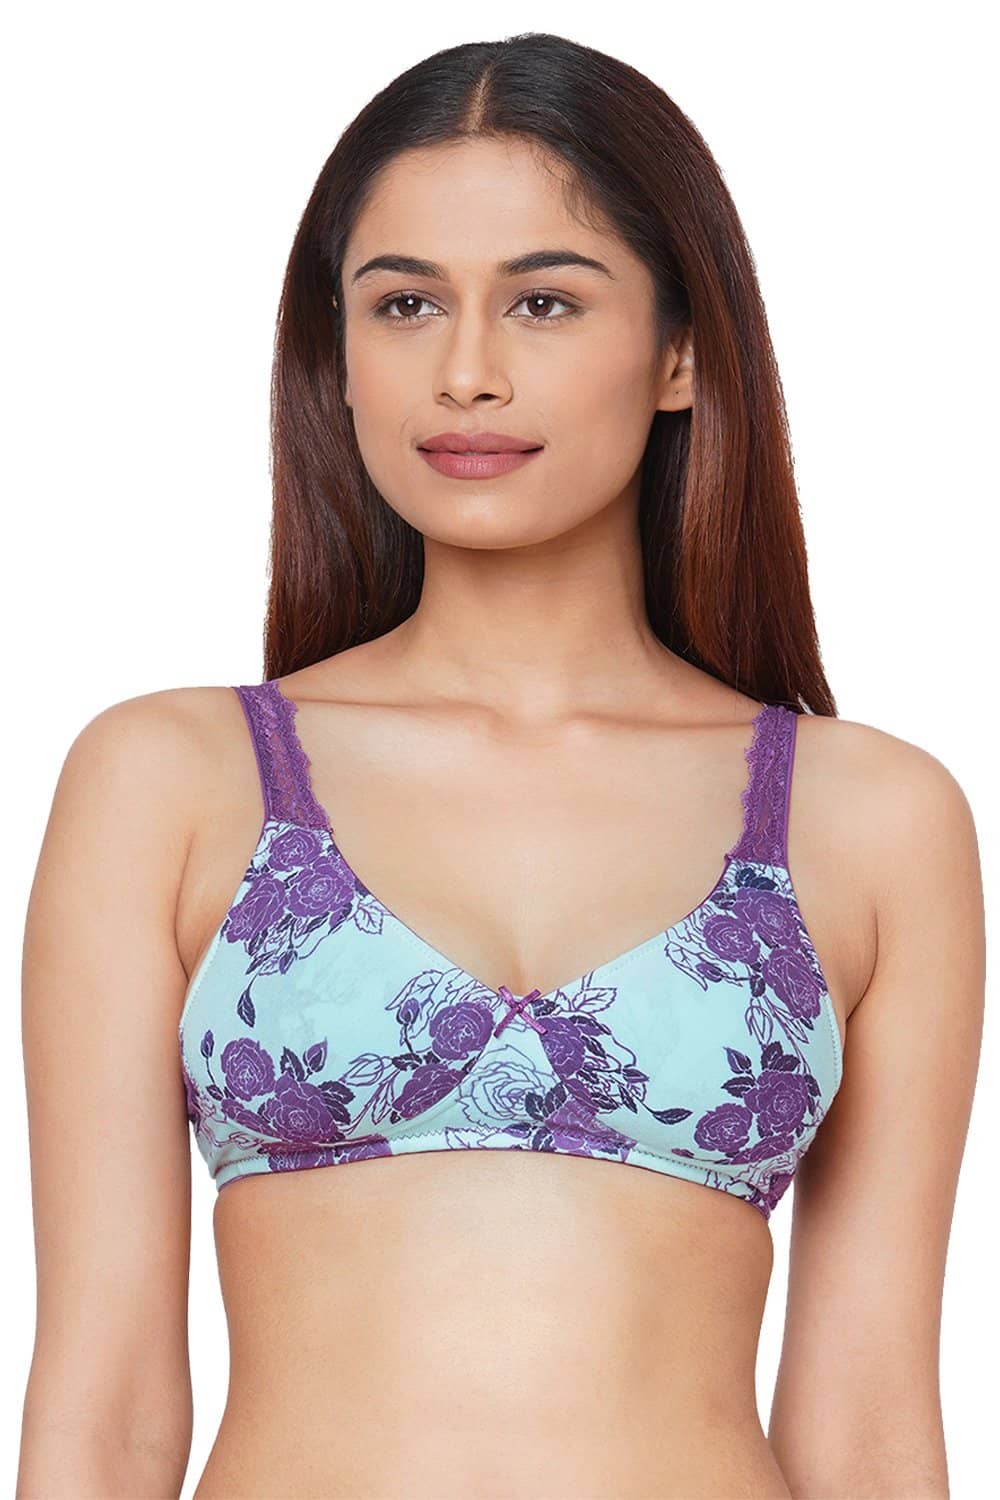 Shop Lace Detail Non-Padded Wired Bra Online